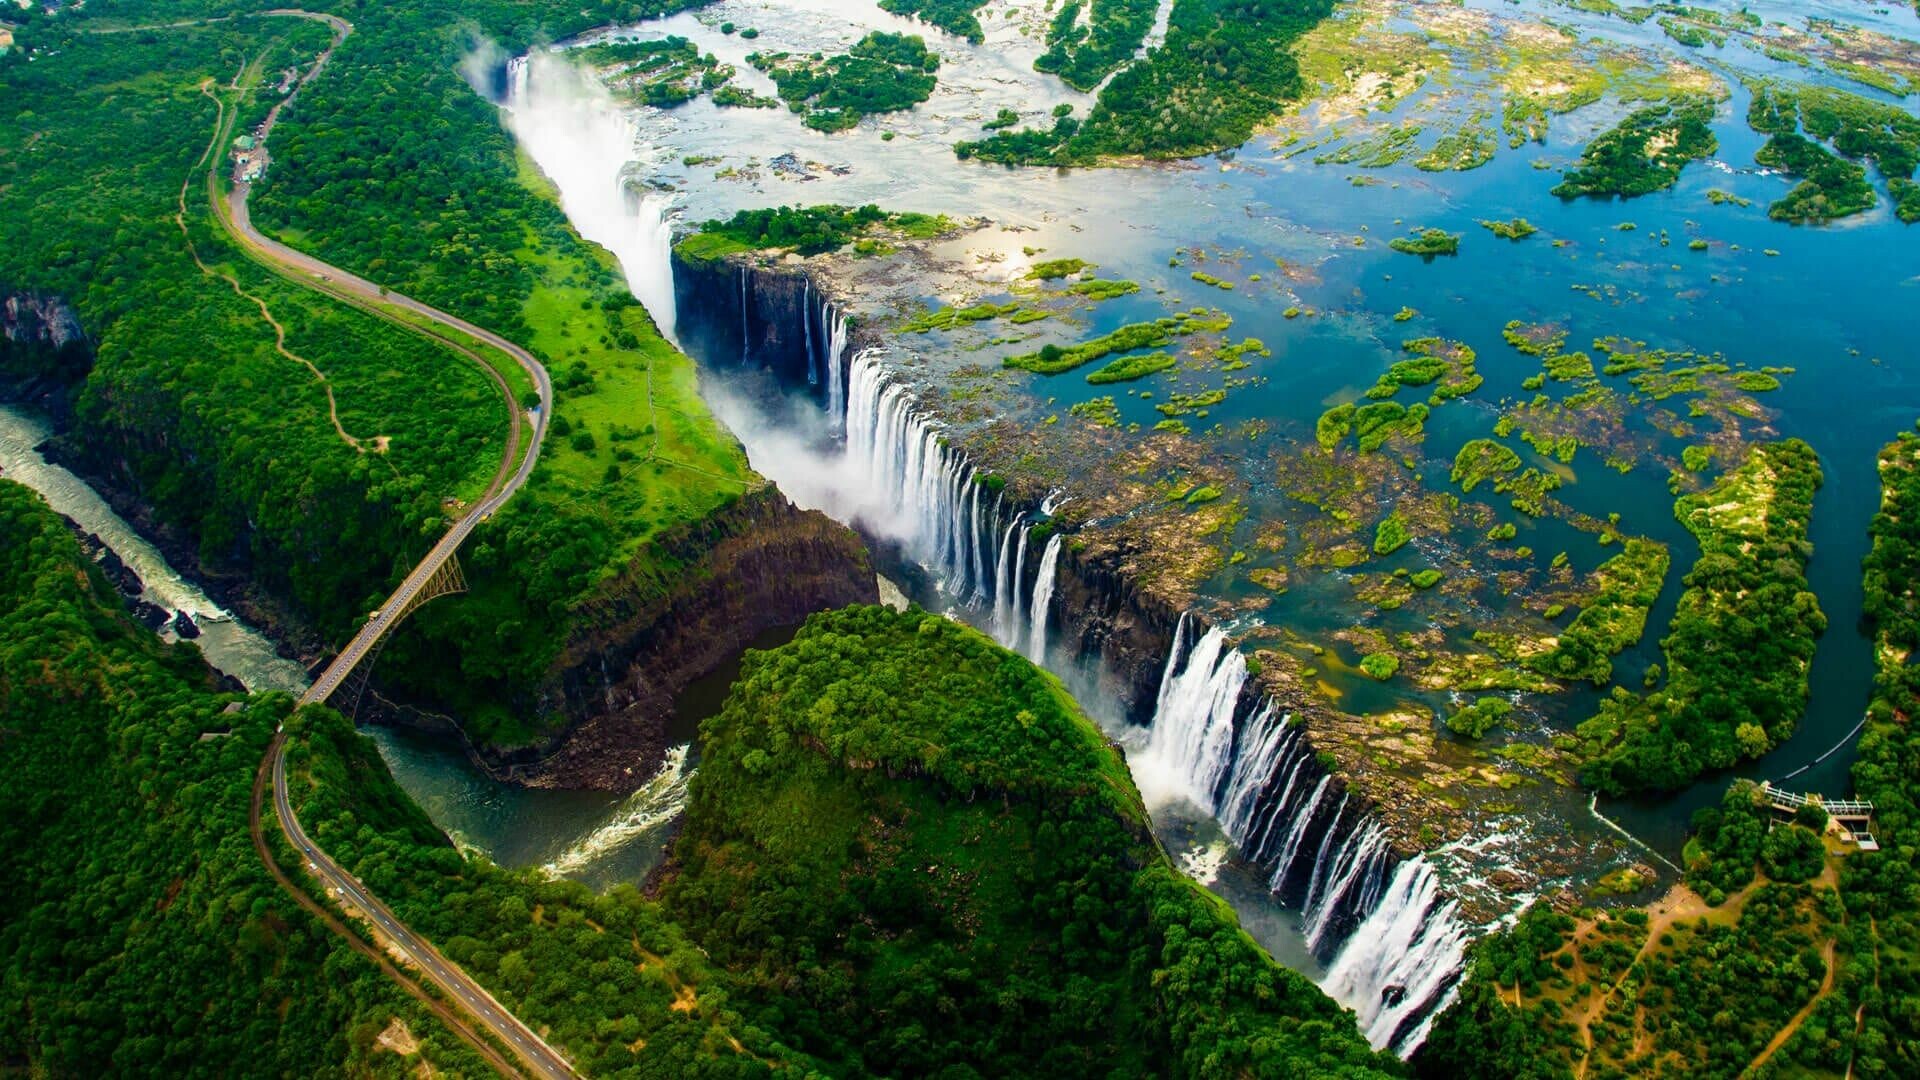 Victoria Falls: African waterfall, Home to a variety of wildlife, including hippos, elephants, and buffalo. 1920x1080 Full HD Wallpaper.